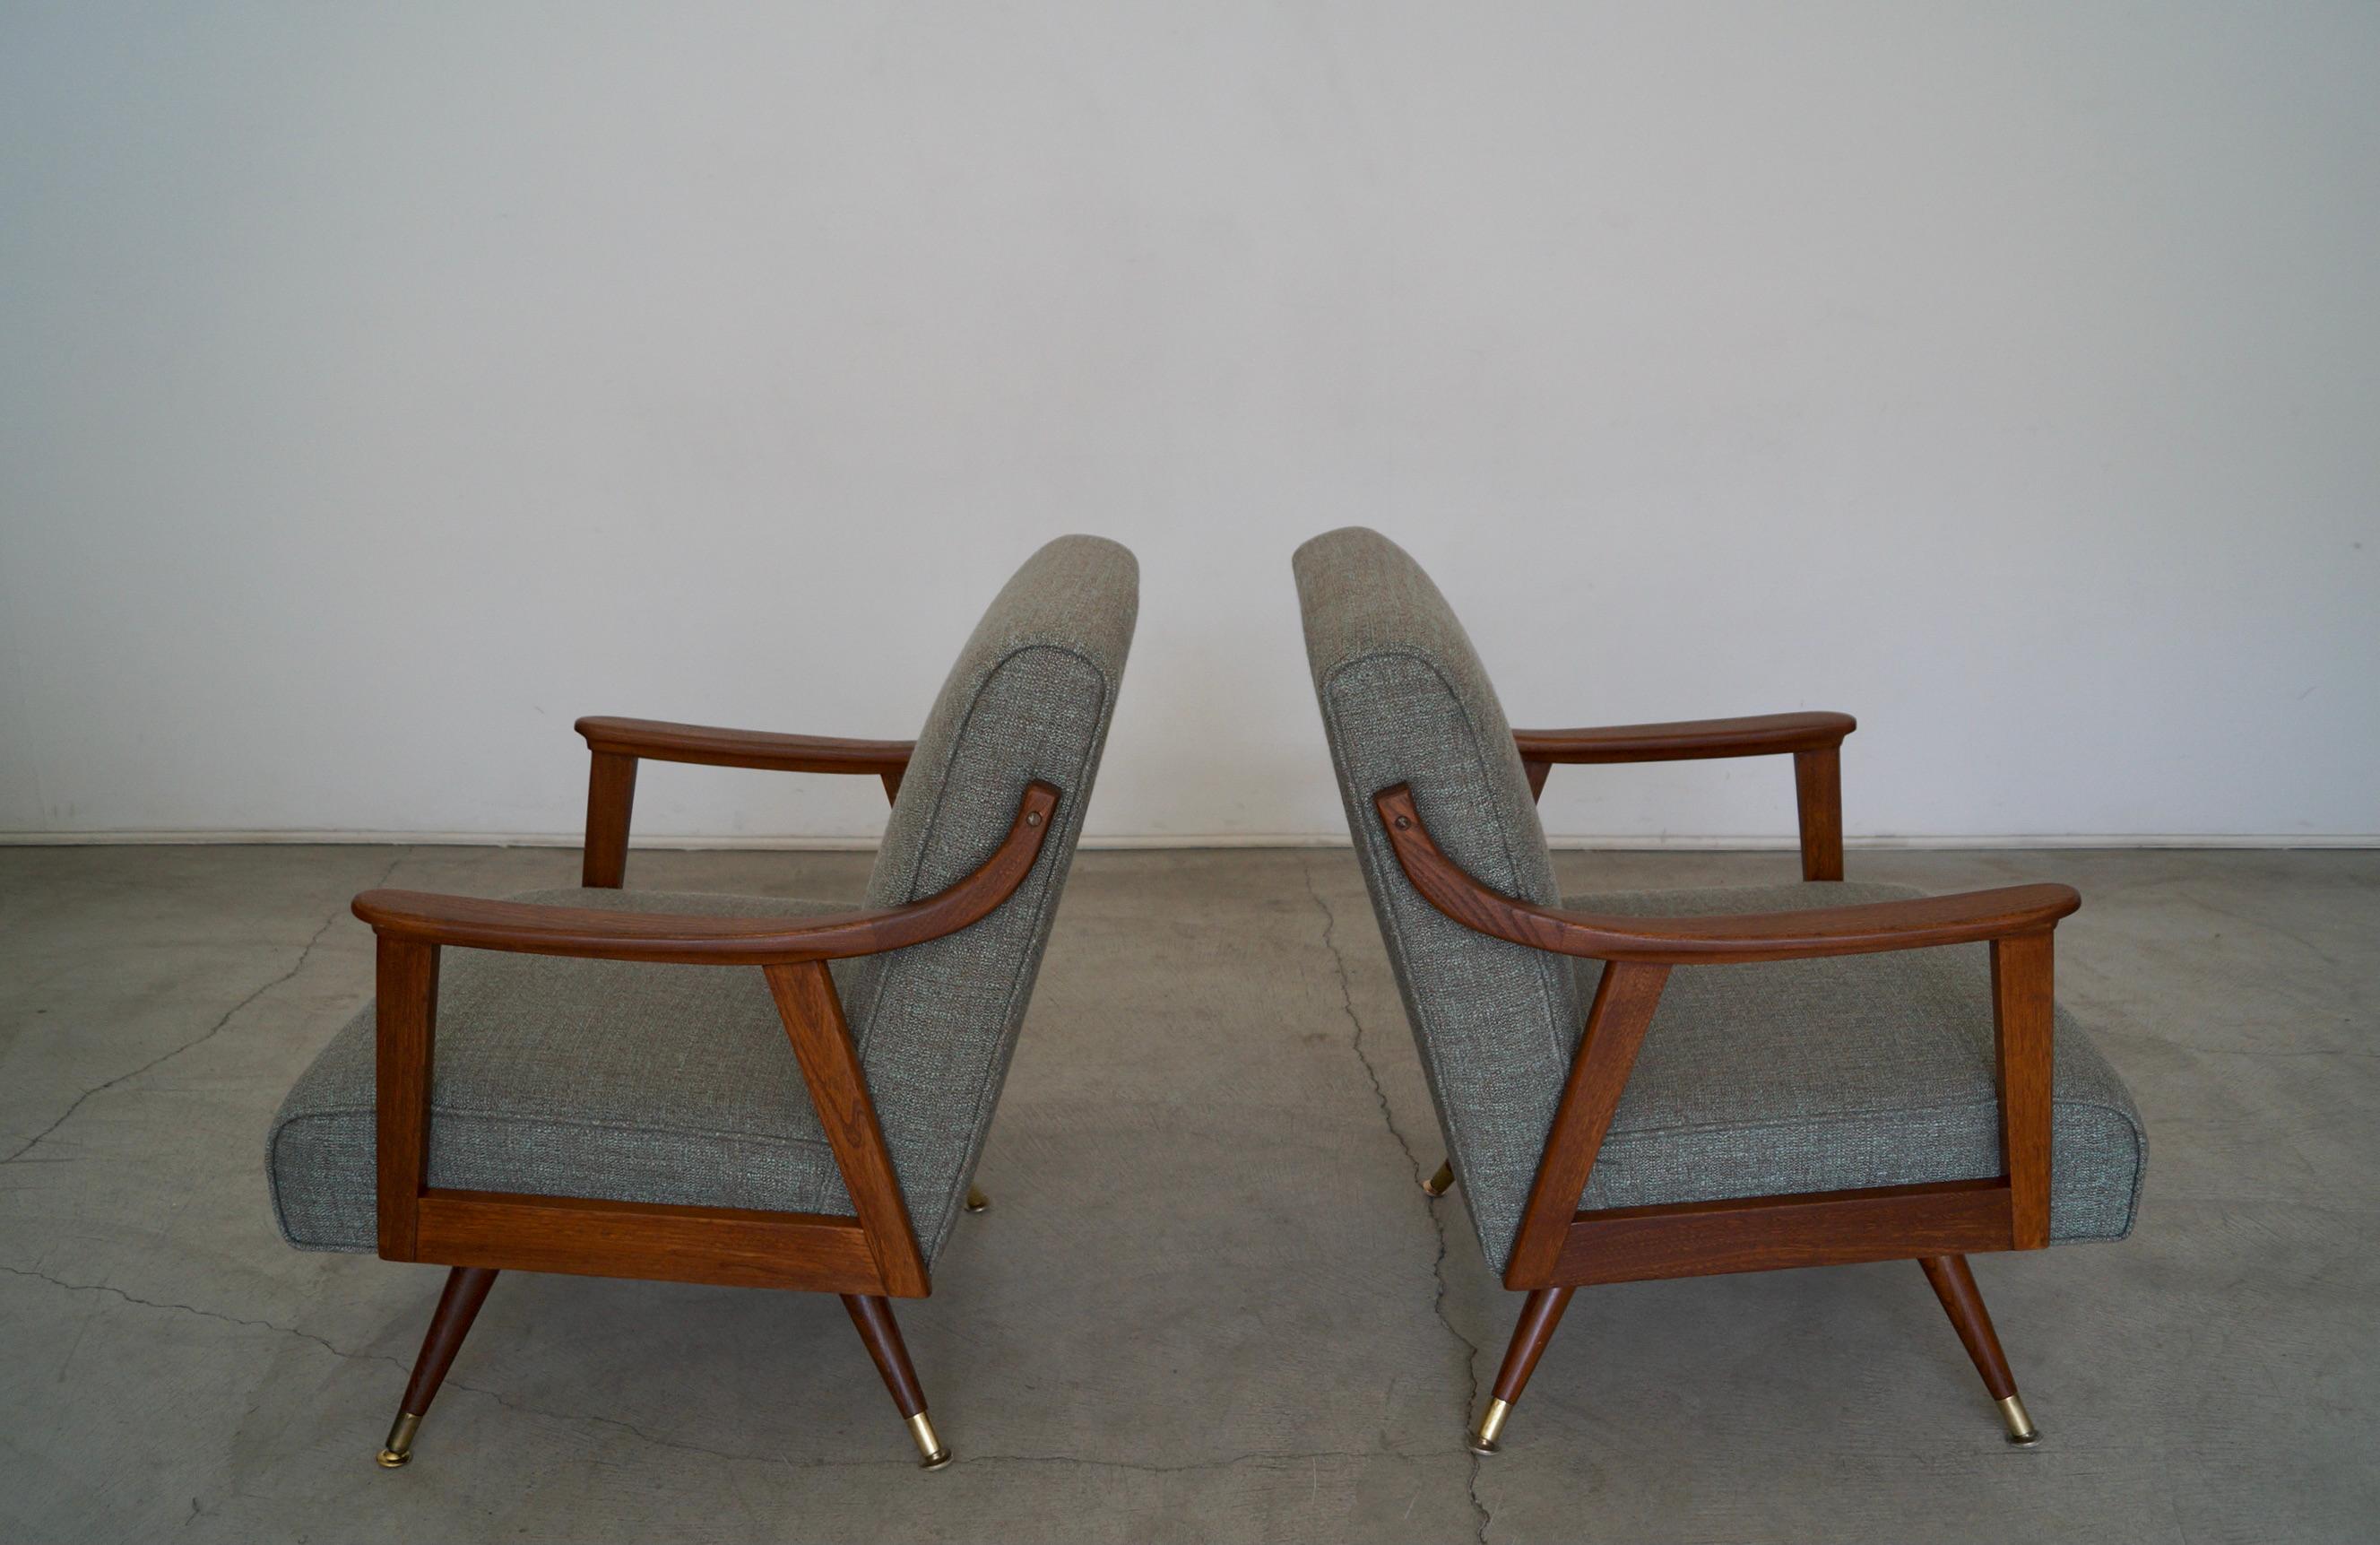 Fabric 1950's Mid-Century Modern Lounge Chairs, a Pair